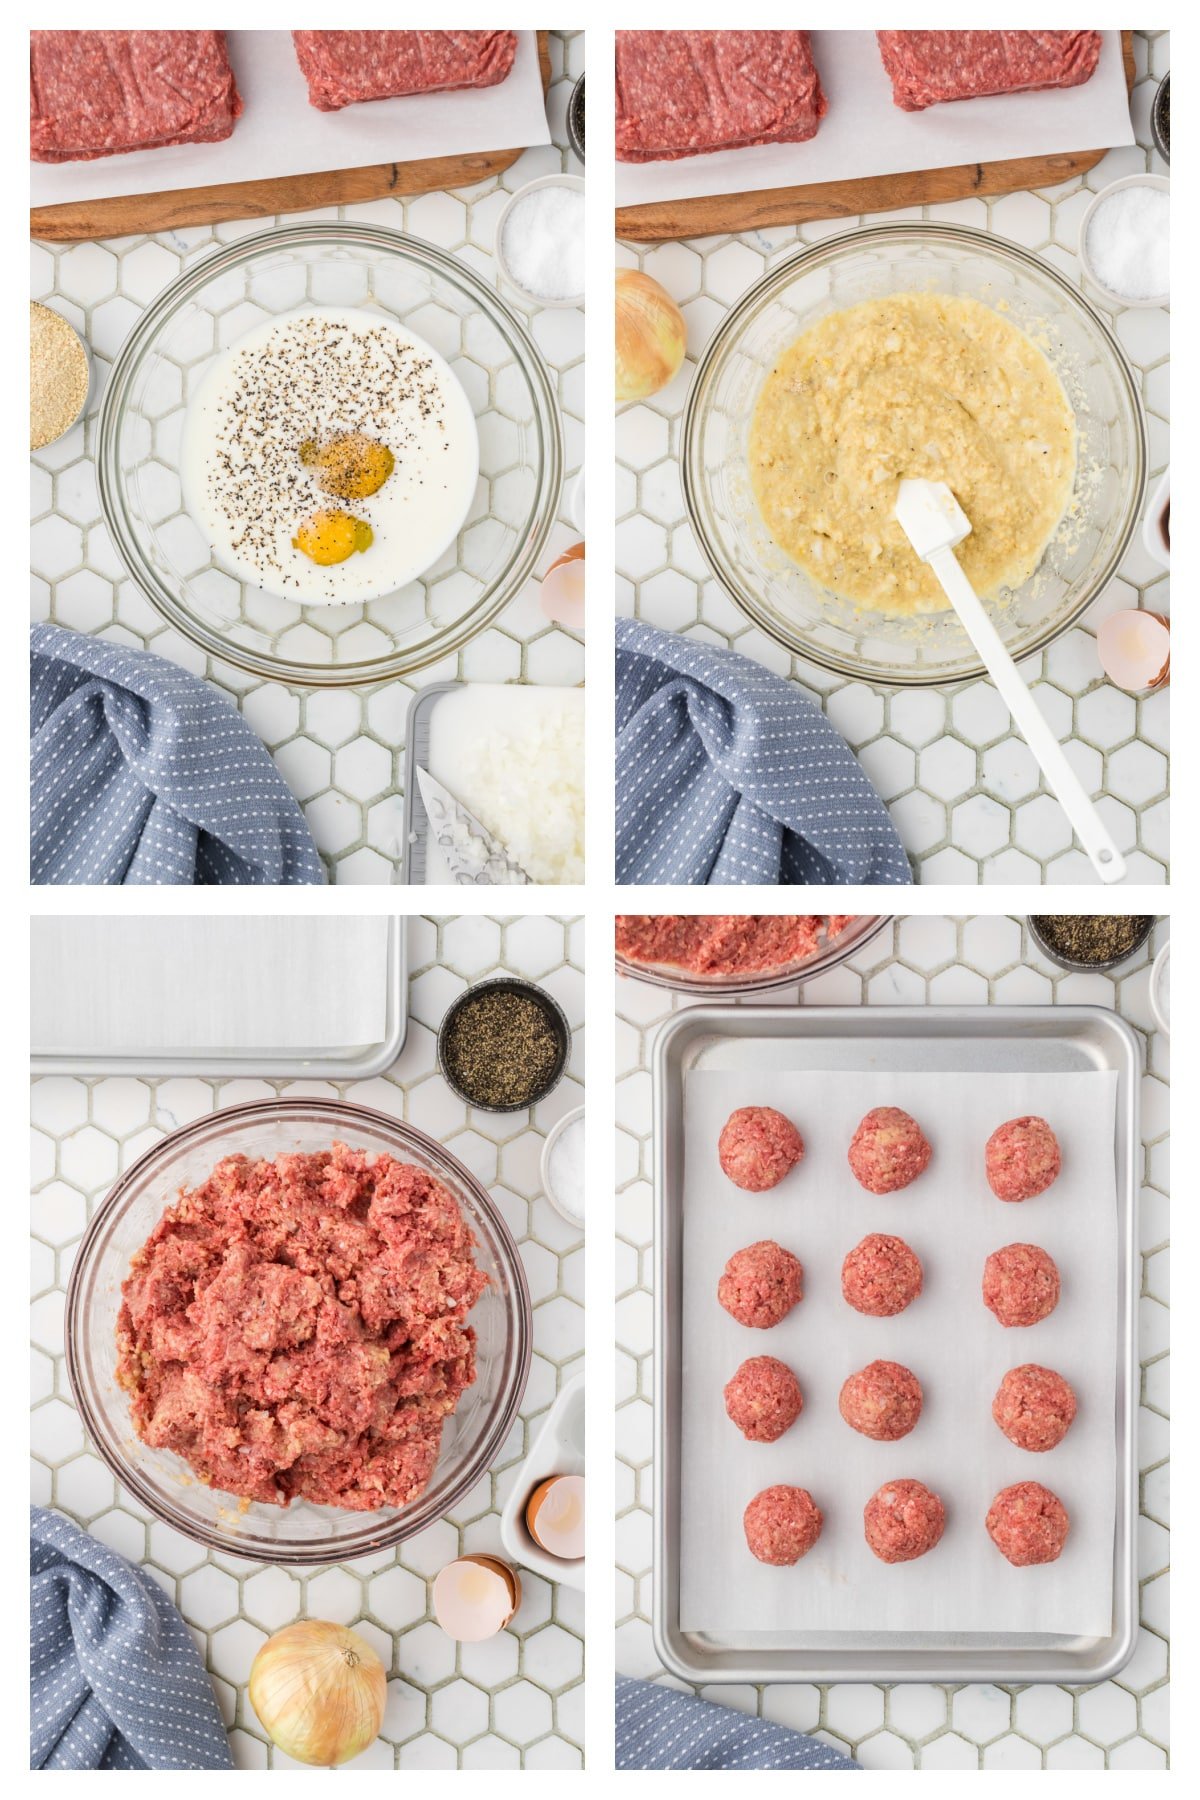 Step by step images showing how to make bison meatballs.